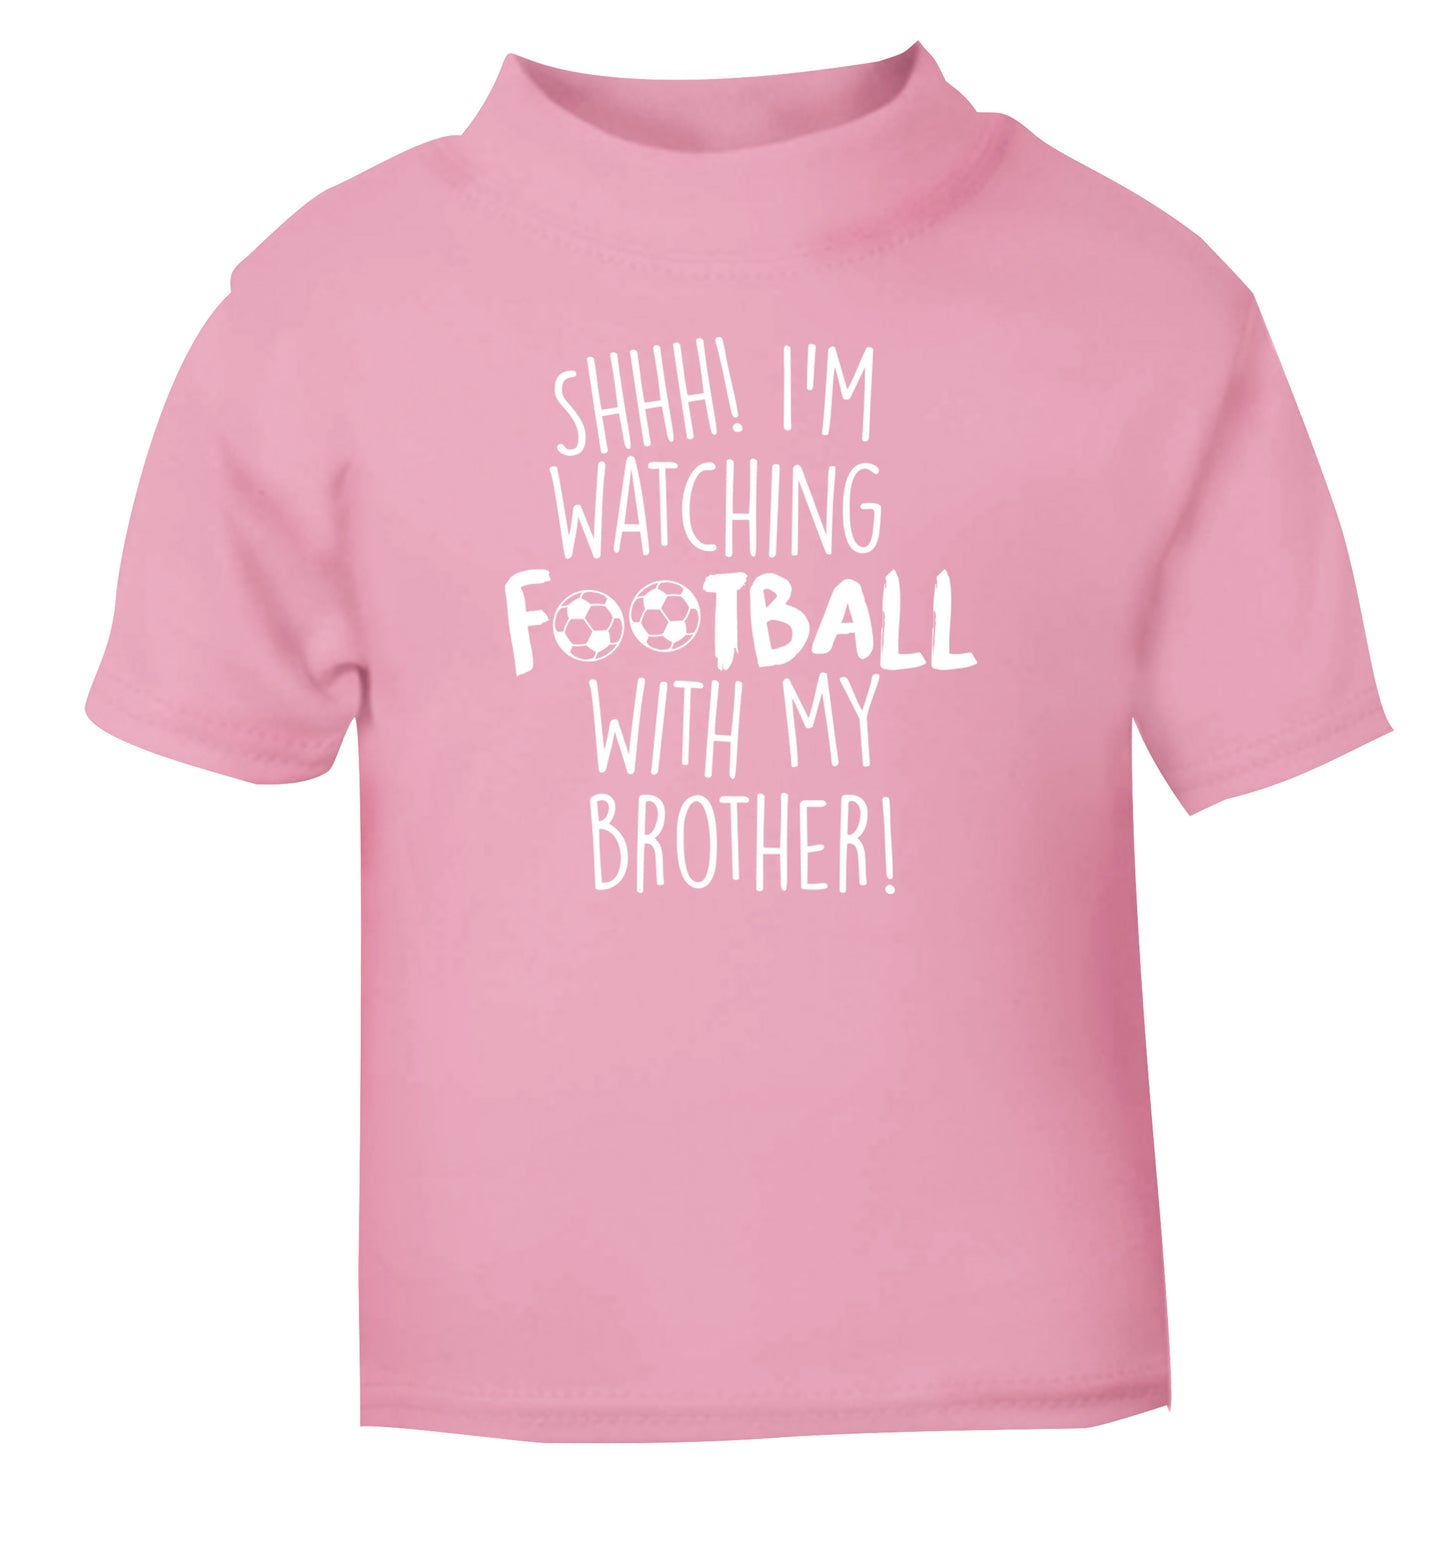 Shhh I'm watching football with my brother light pink Baby Toddler Tshirt 2 Years